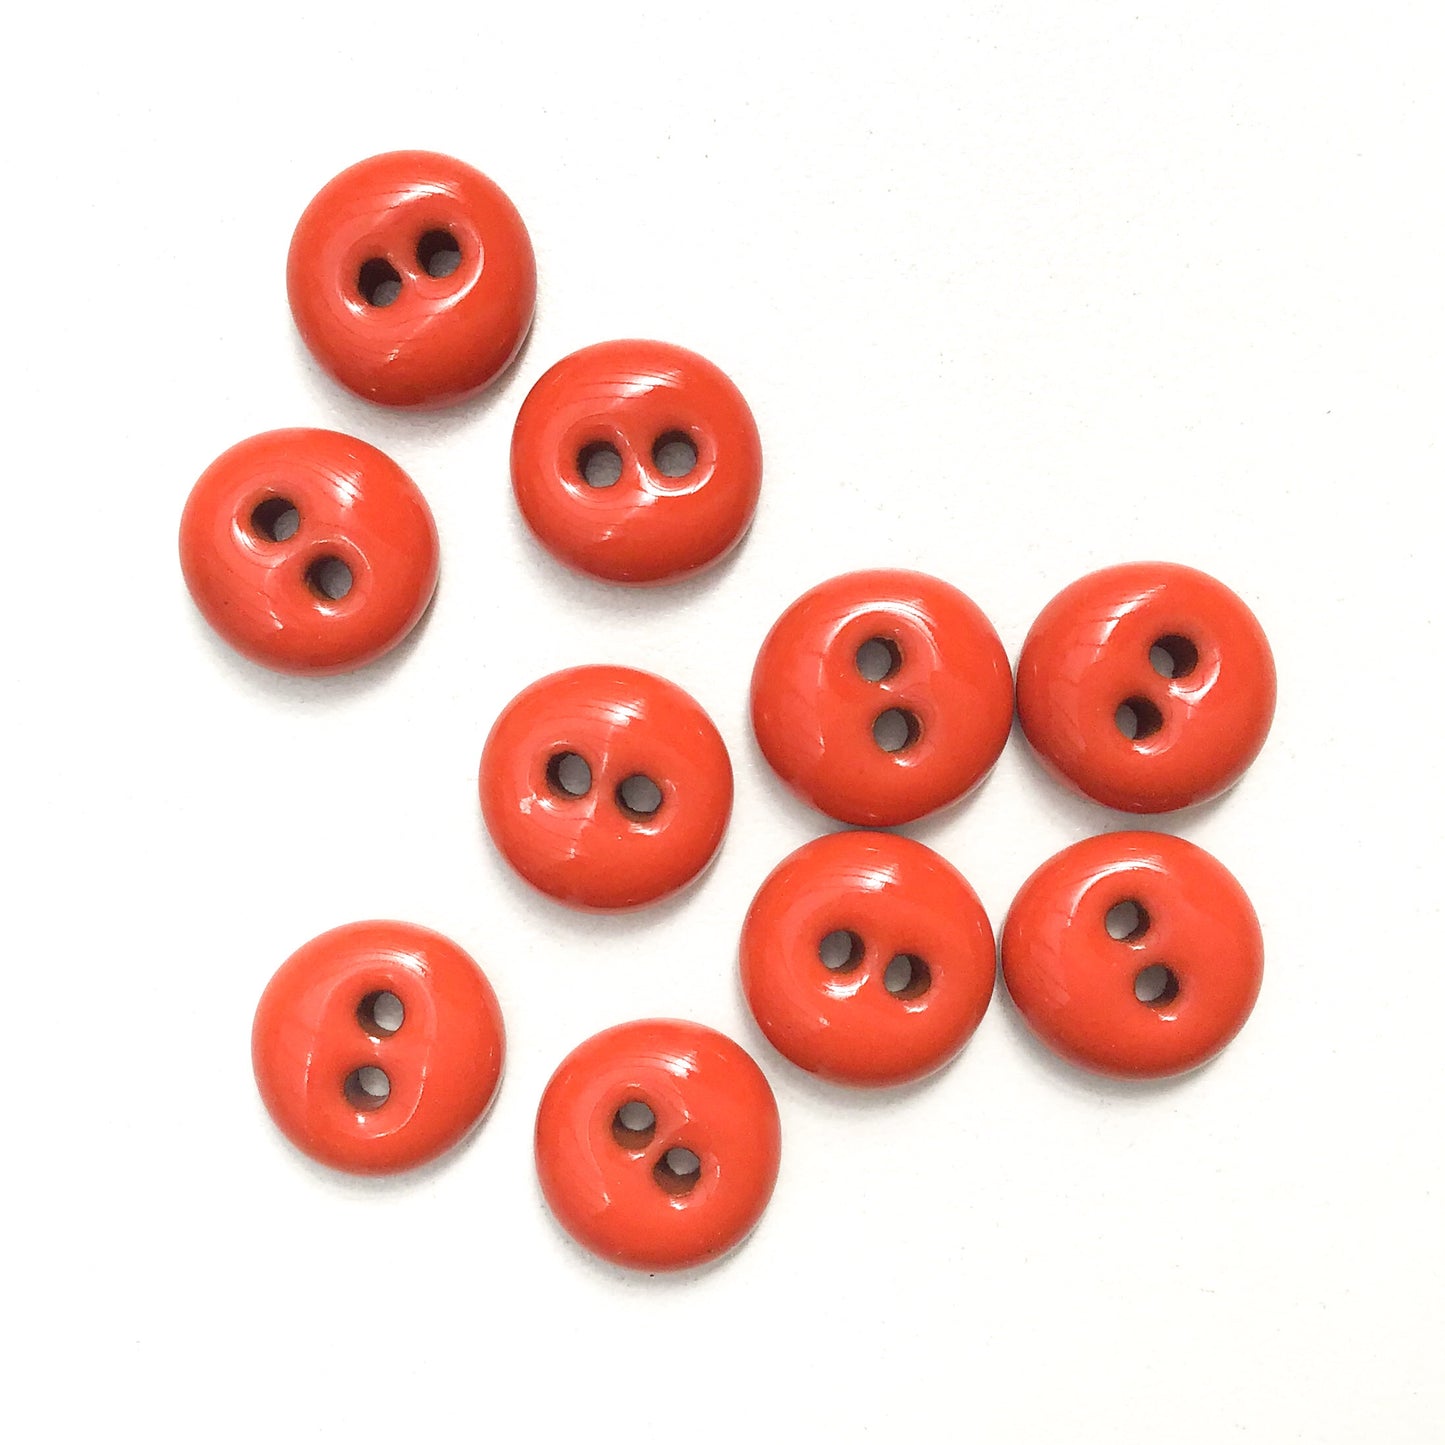 Red-Orange Ceramic Buttons - Hand Made Clay Buttons - 7/16" - 10 Pack